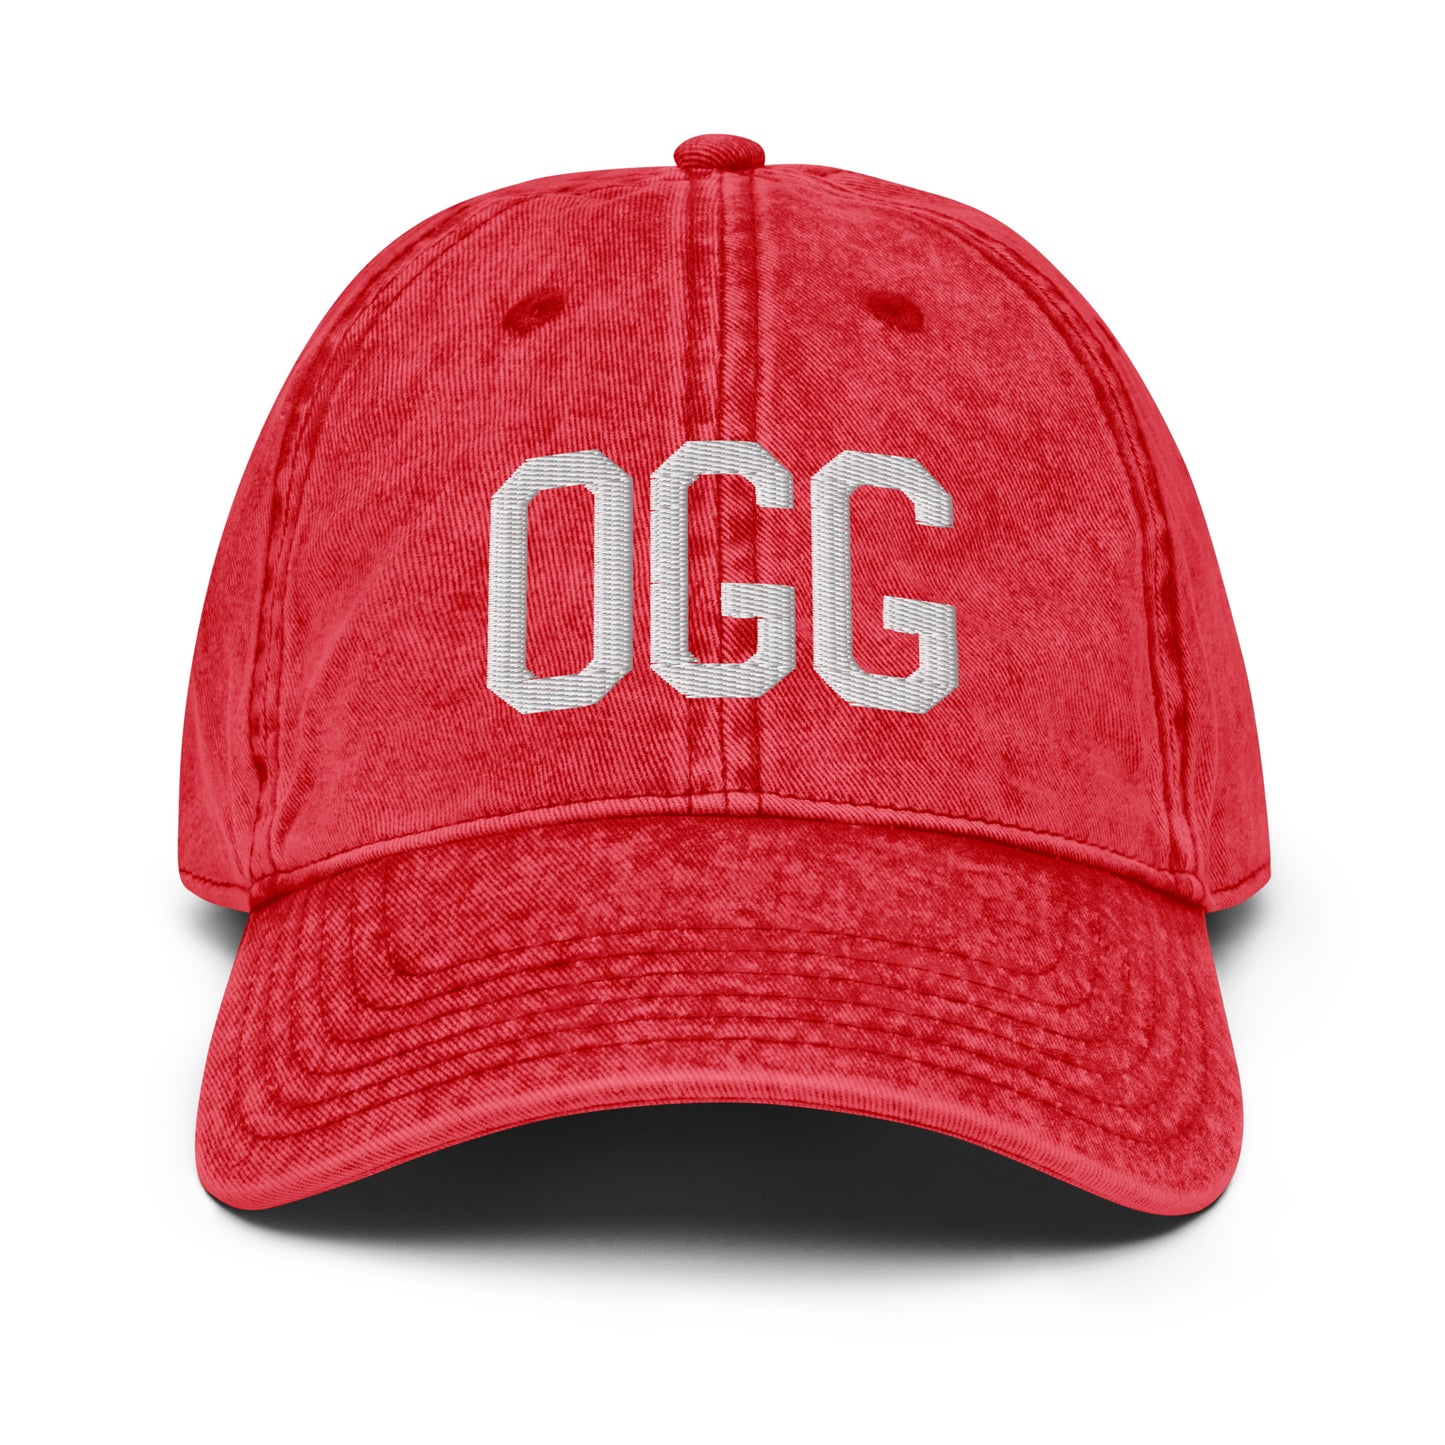 Airport Code Twill Cap - White • OGG Maui • YHM Designs - Image 22